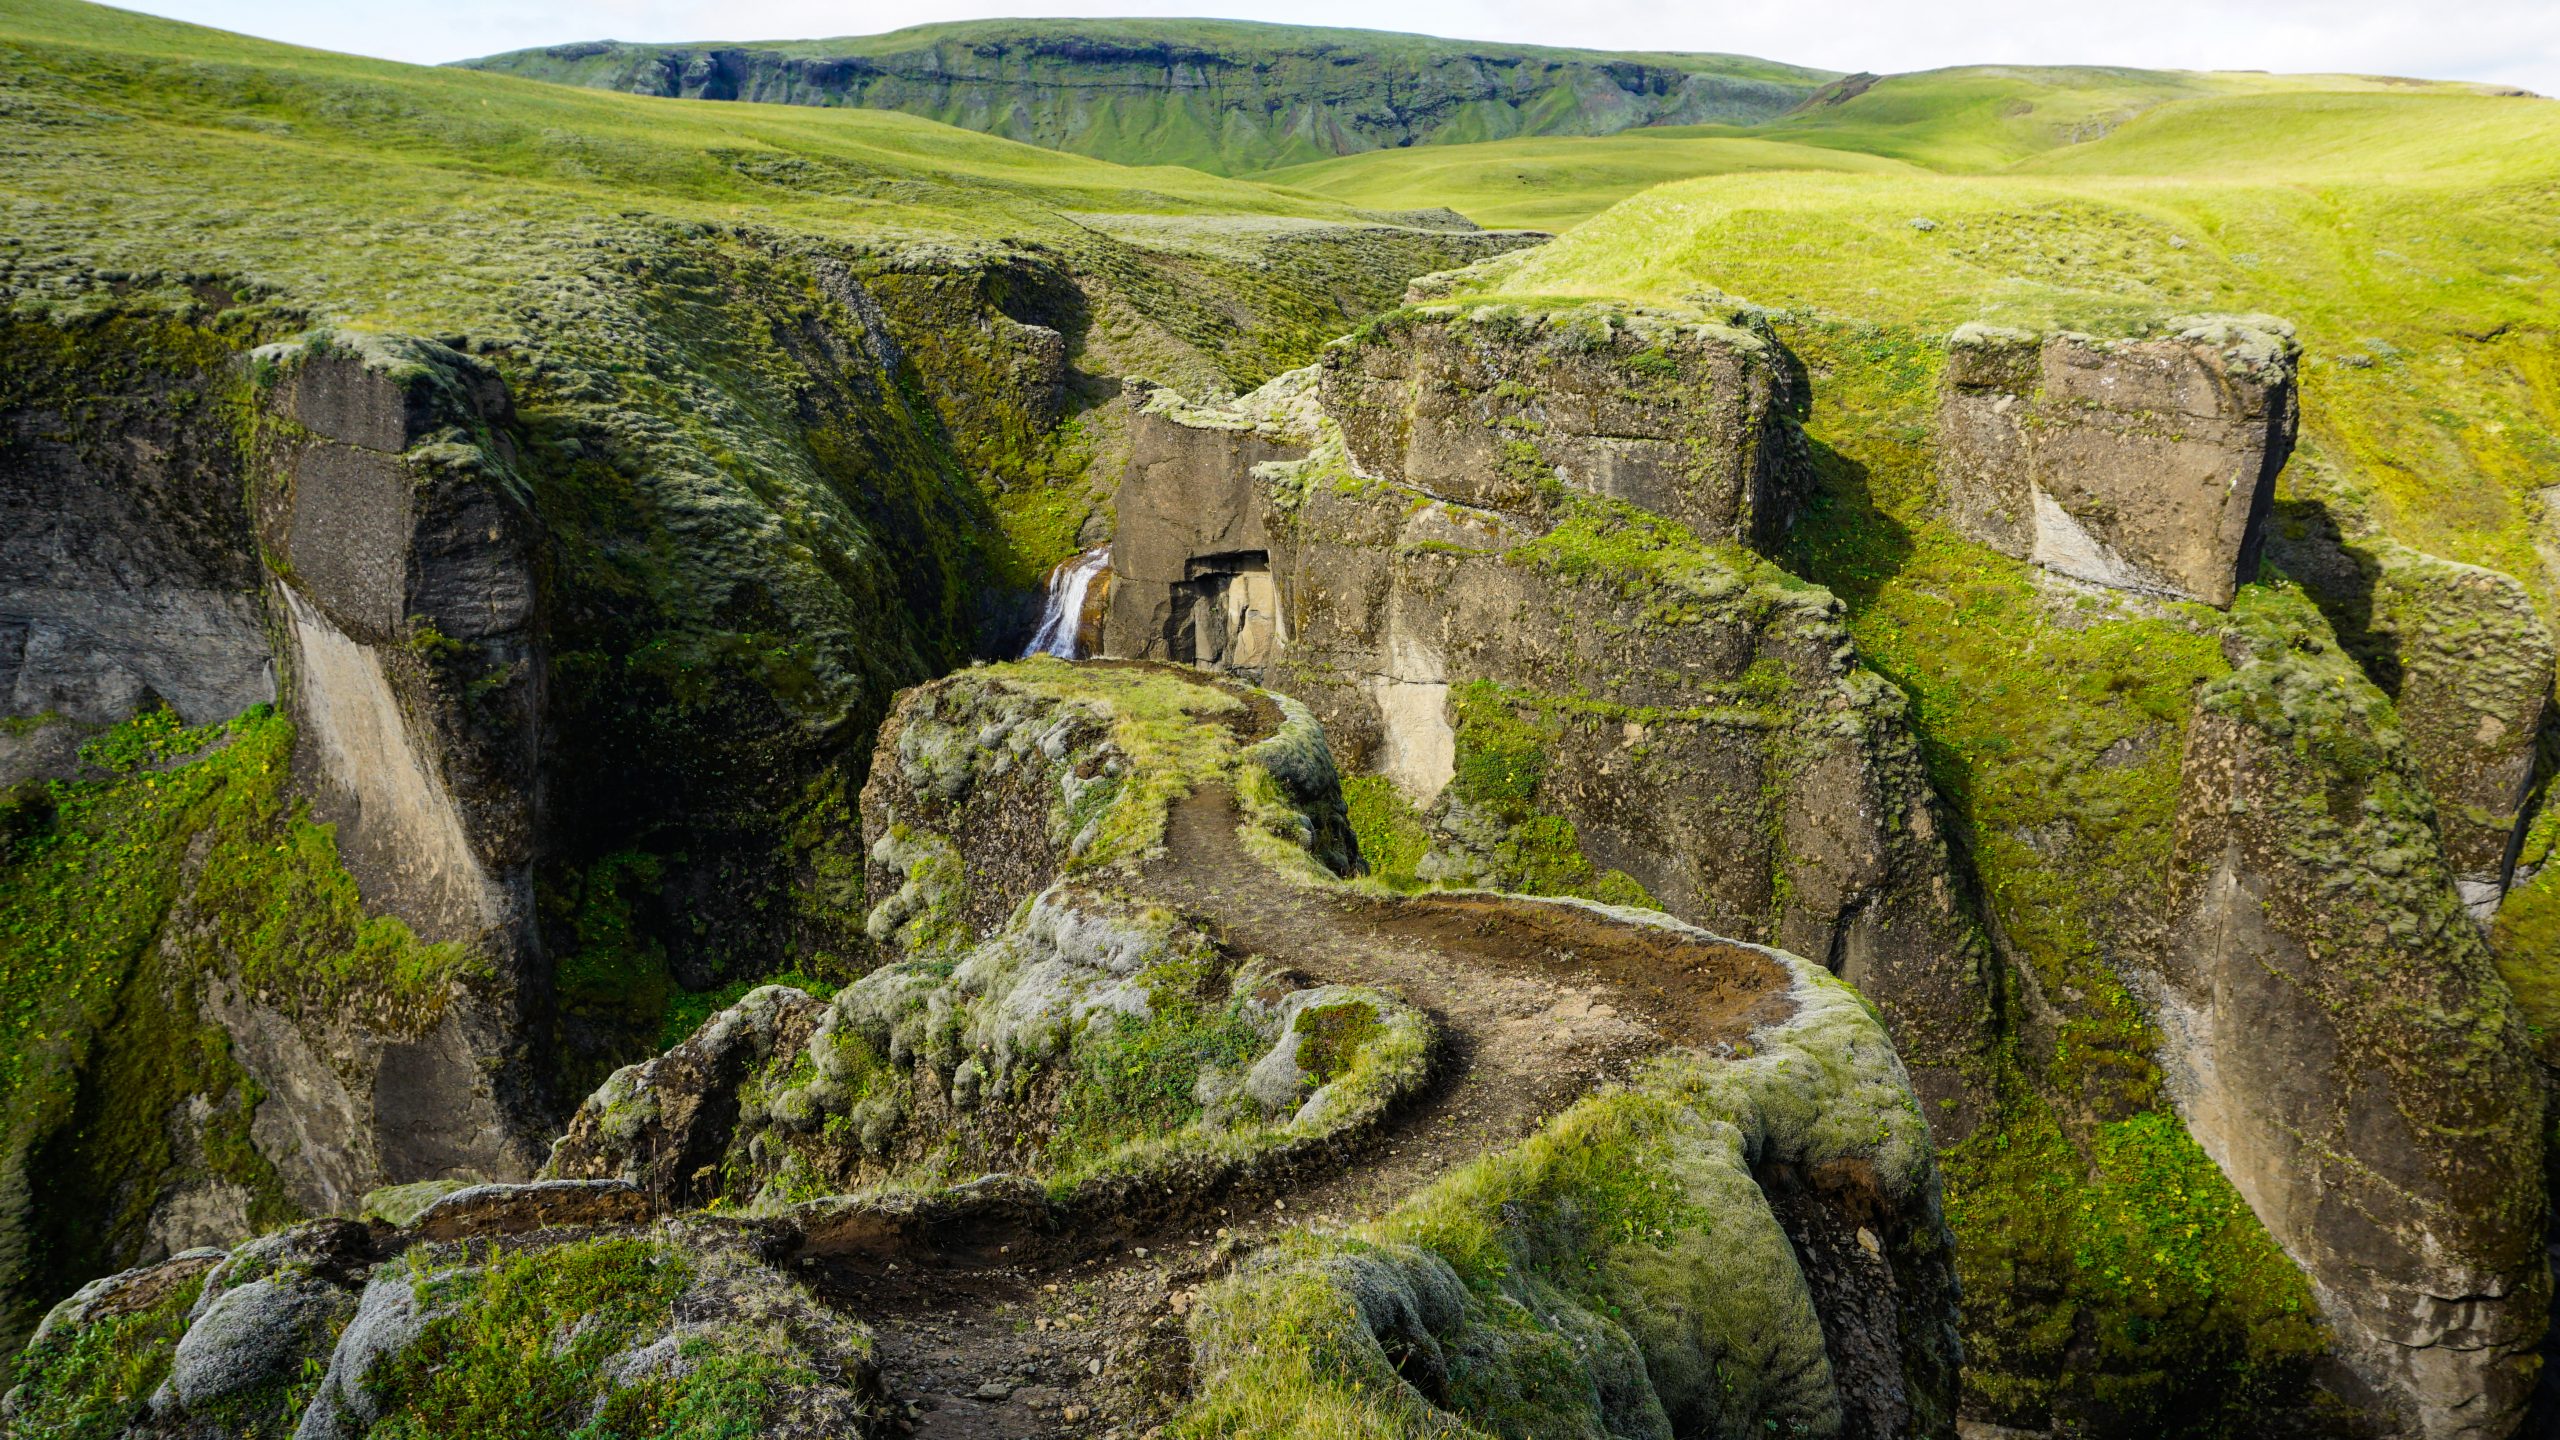 Fjaðrárgljúfur canyon is a stop of the road trip itinerary in Iceland